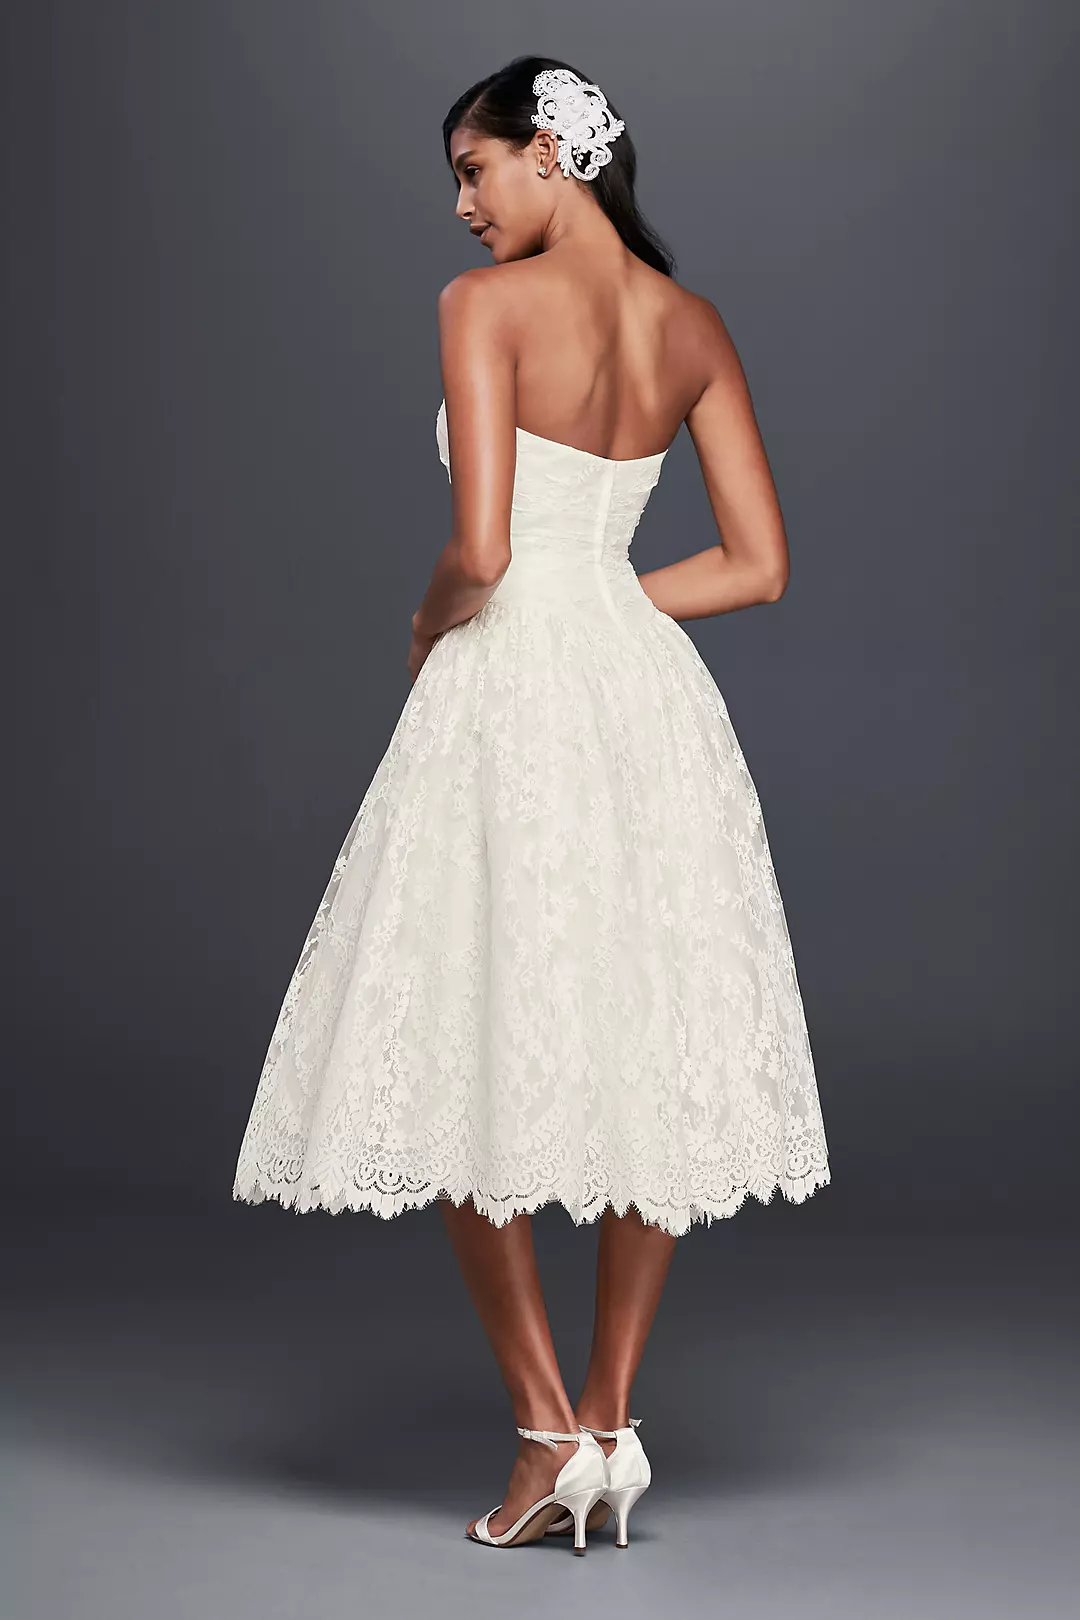 Short Lace Strapless Wedding Dress with Ruching Image 2